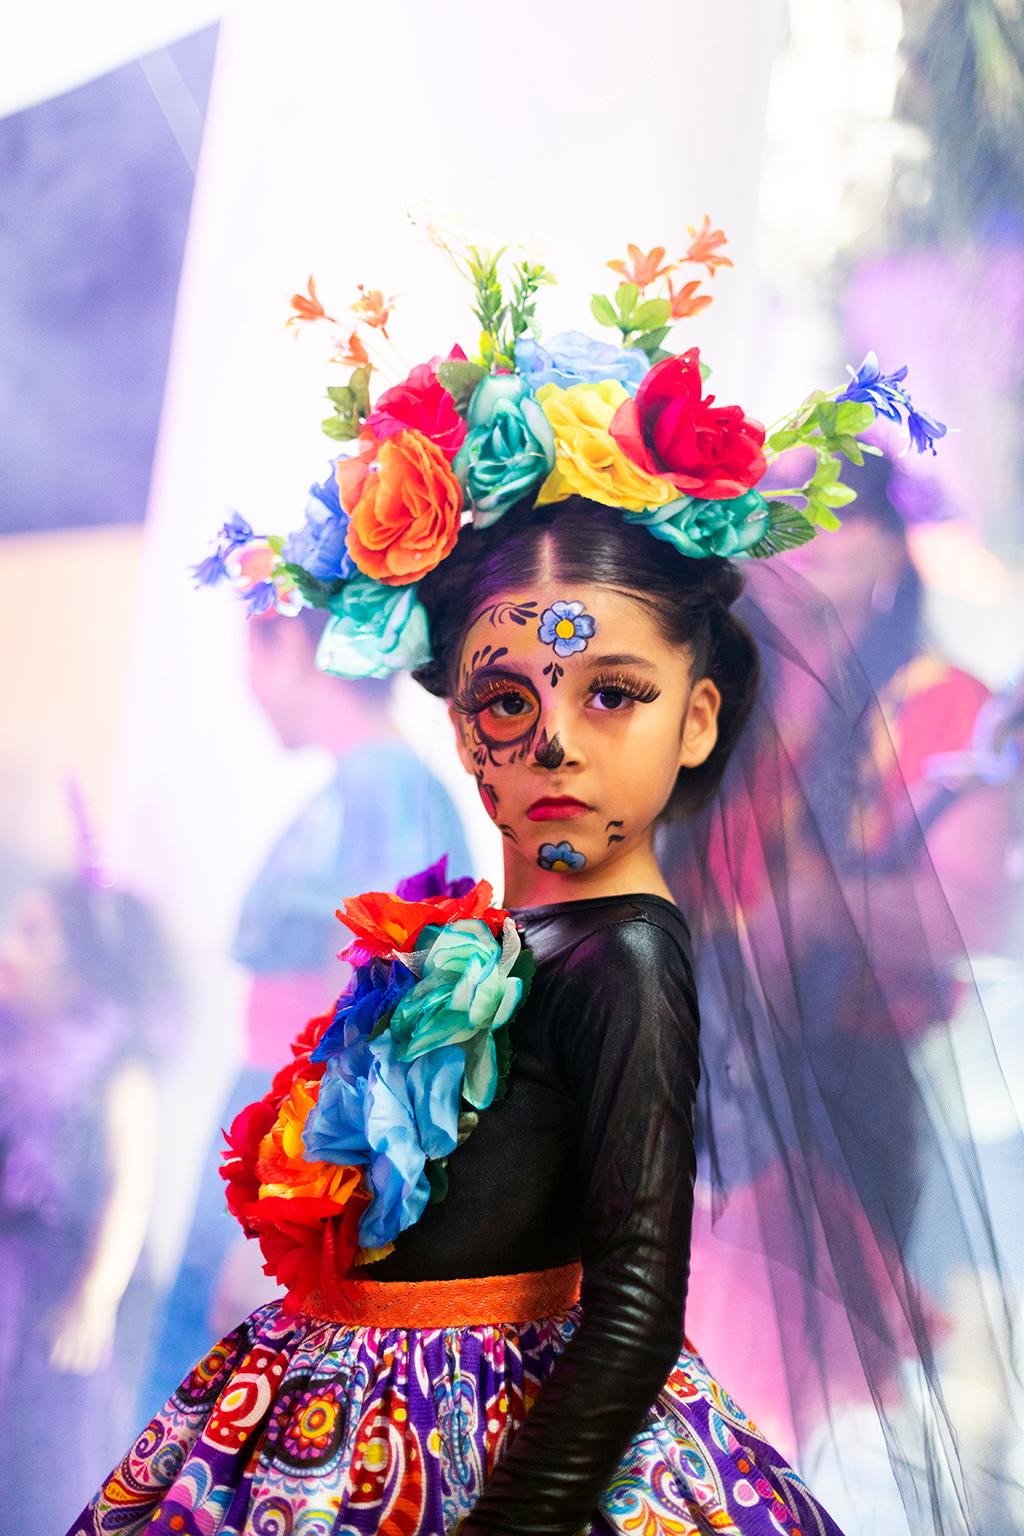  She has attitude! Dressed for Day of the Dead, Dia de los Muertos, Mexico, 2023 For Sale 2